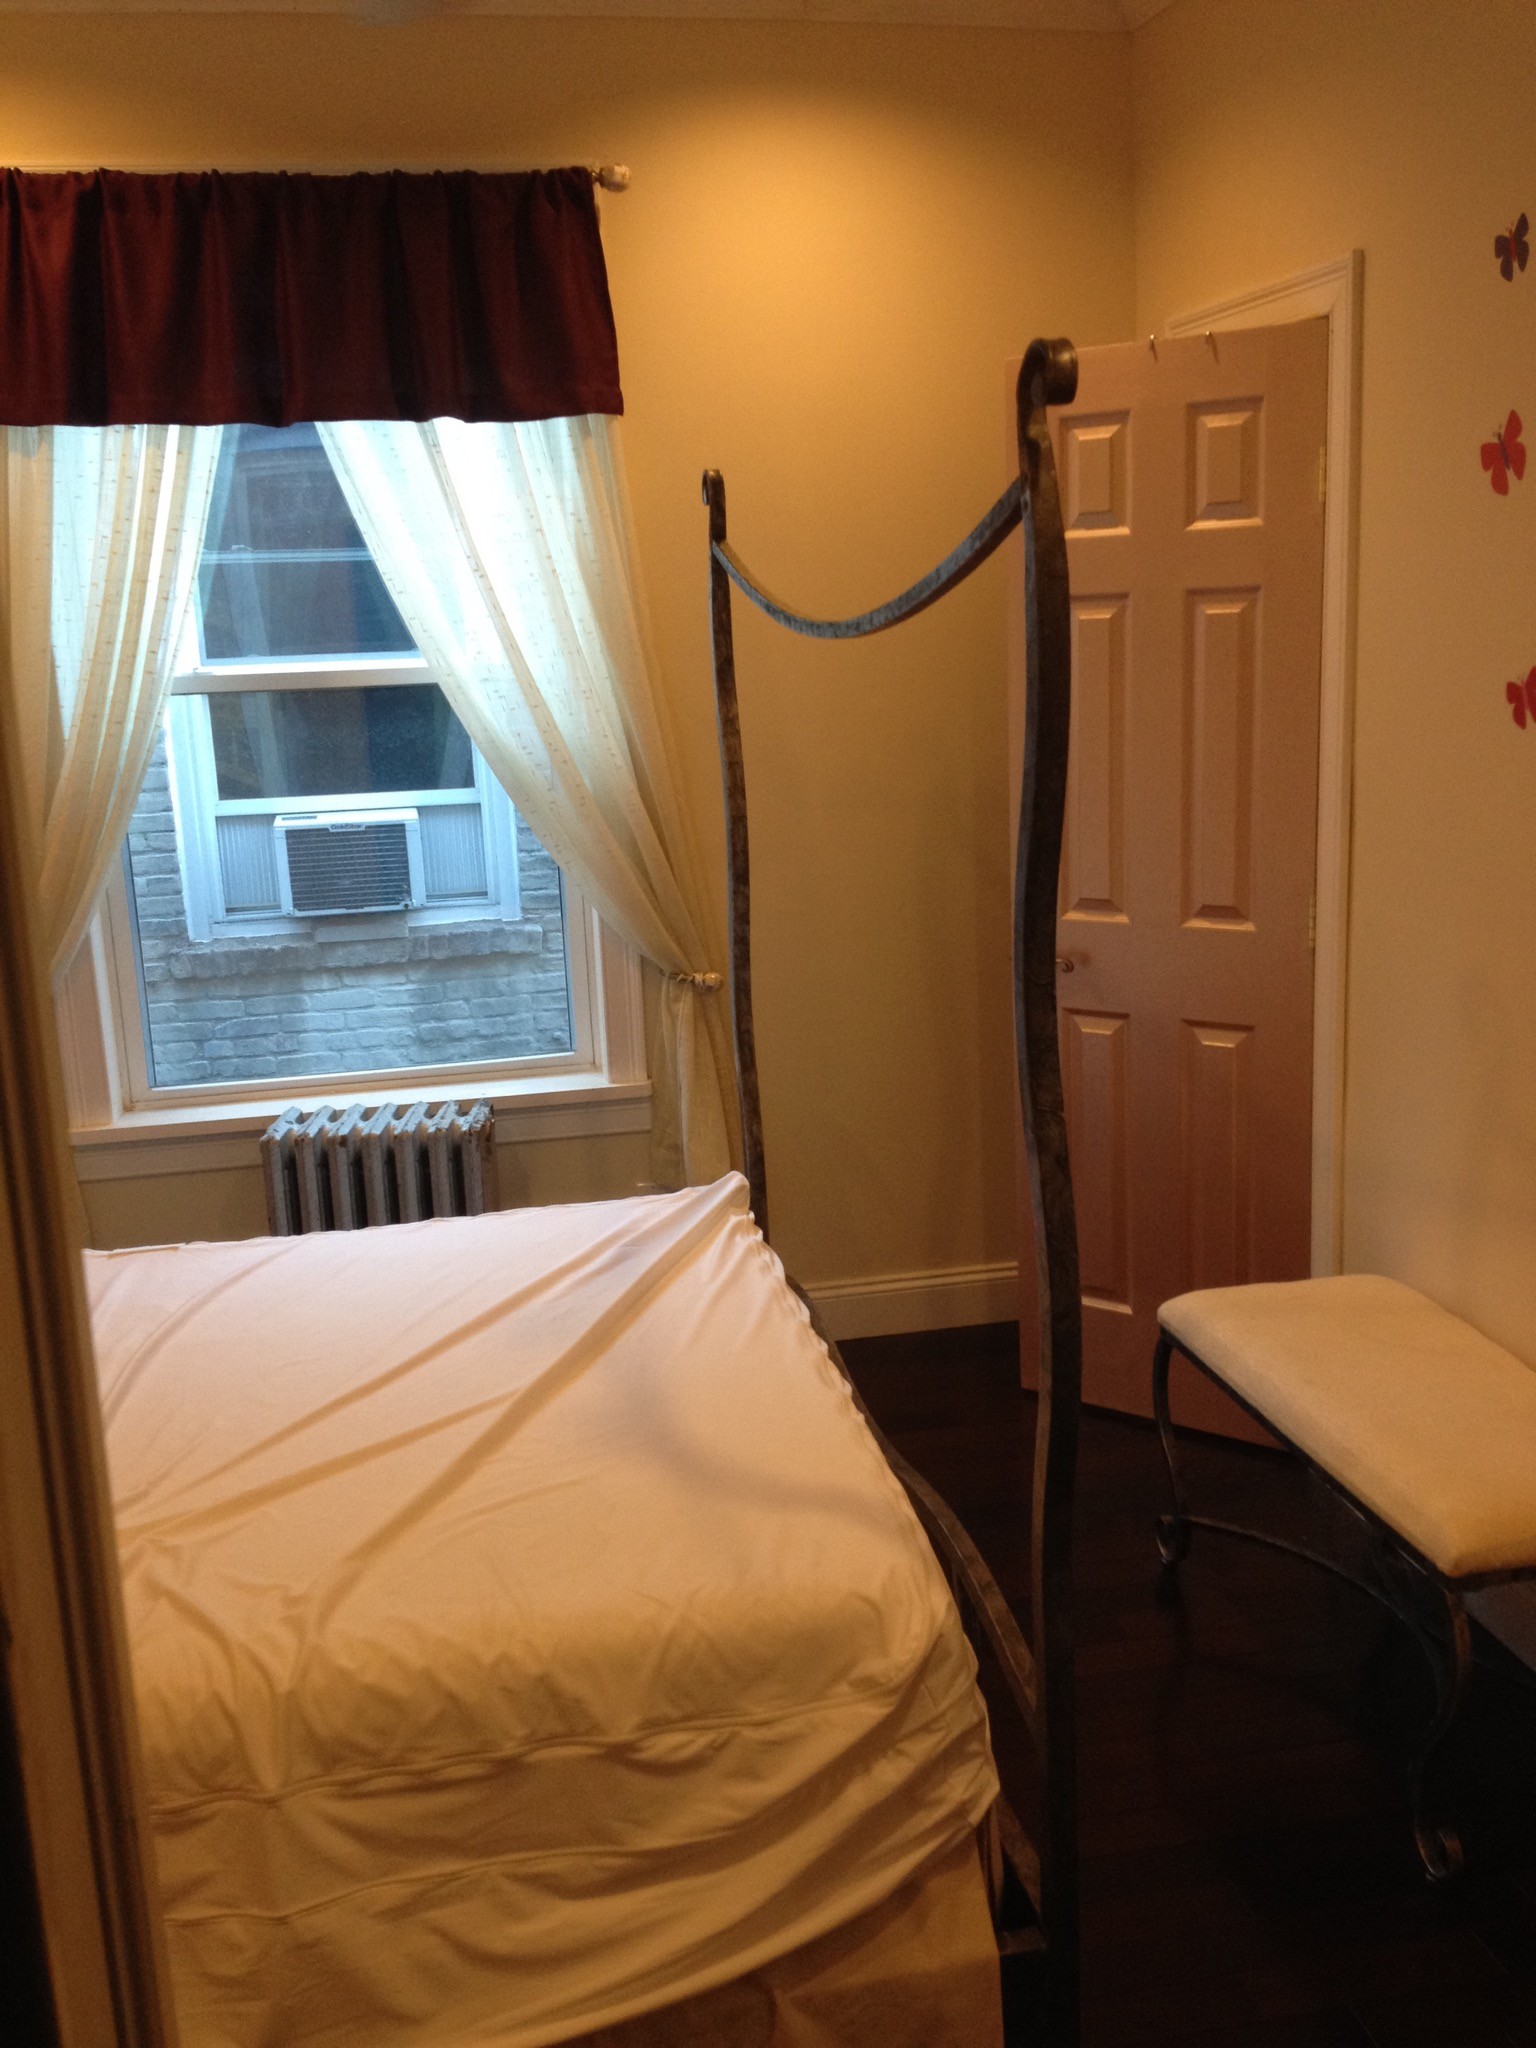 Large Room For Rent In Crownheights Brooklyn Near 4 Train